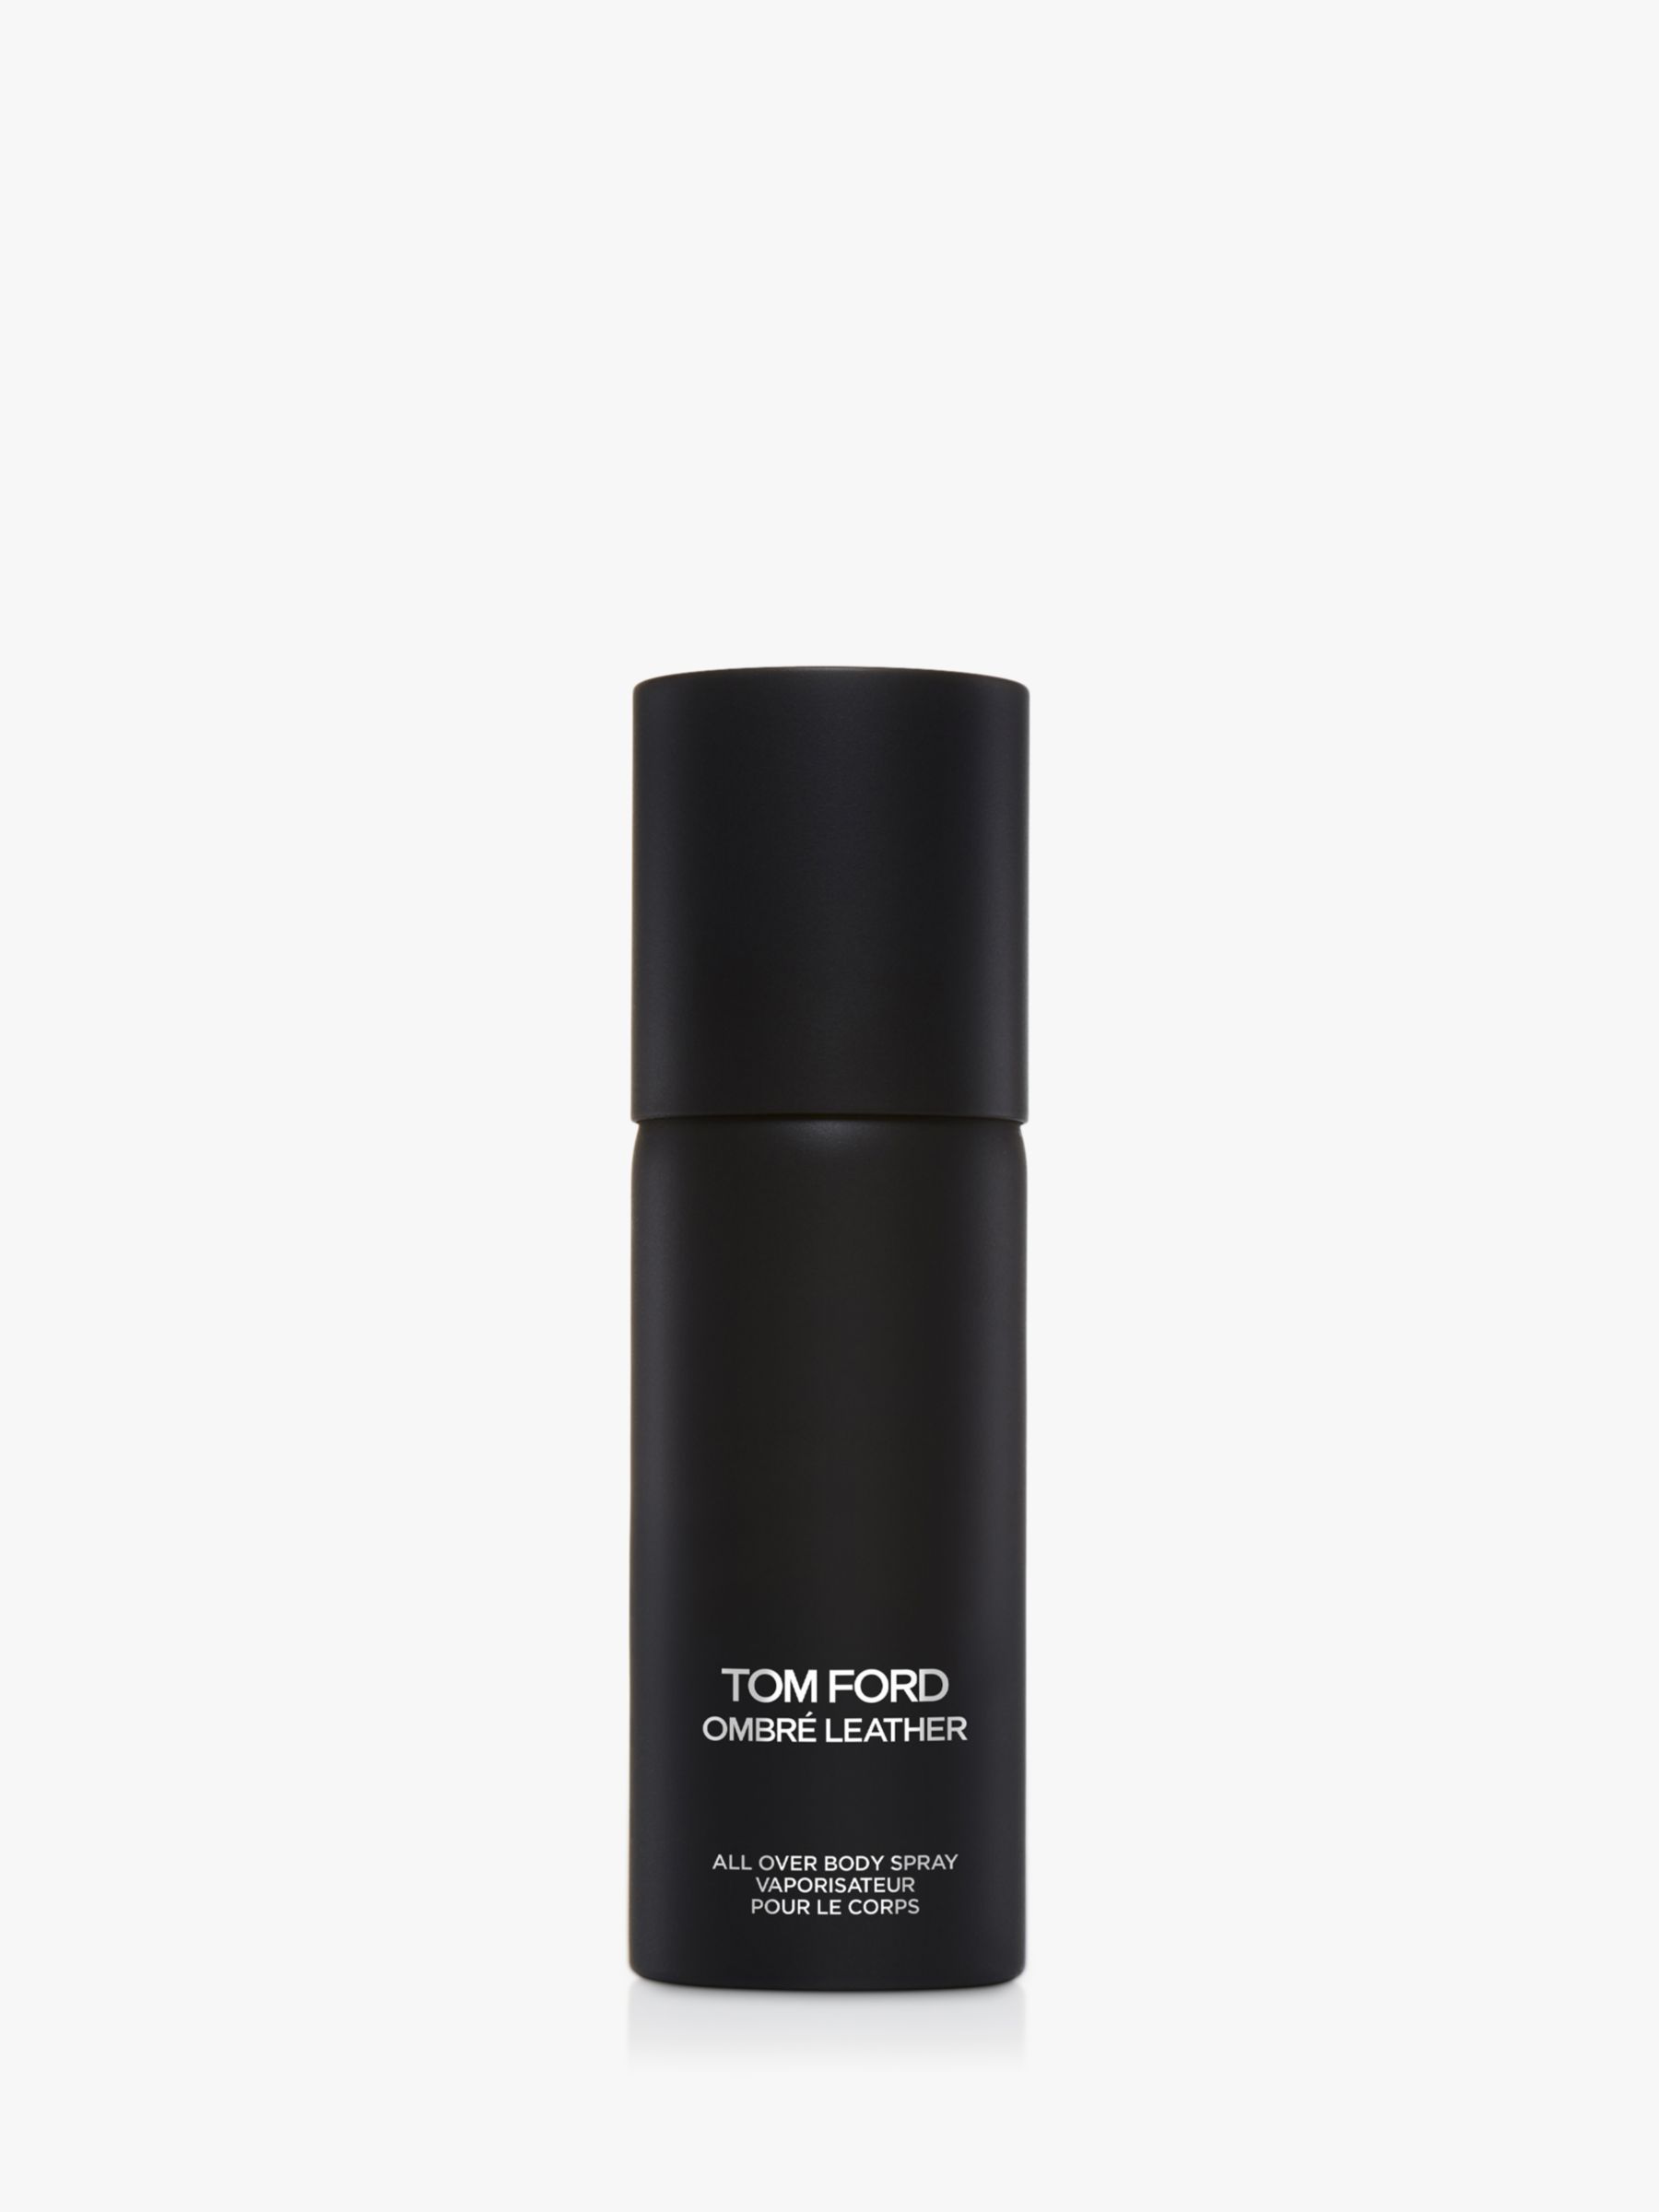 TOM FORD Ombré Leather All Over Body Spray, 150ml at John Lewis & Partners